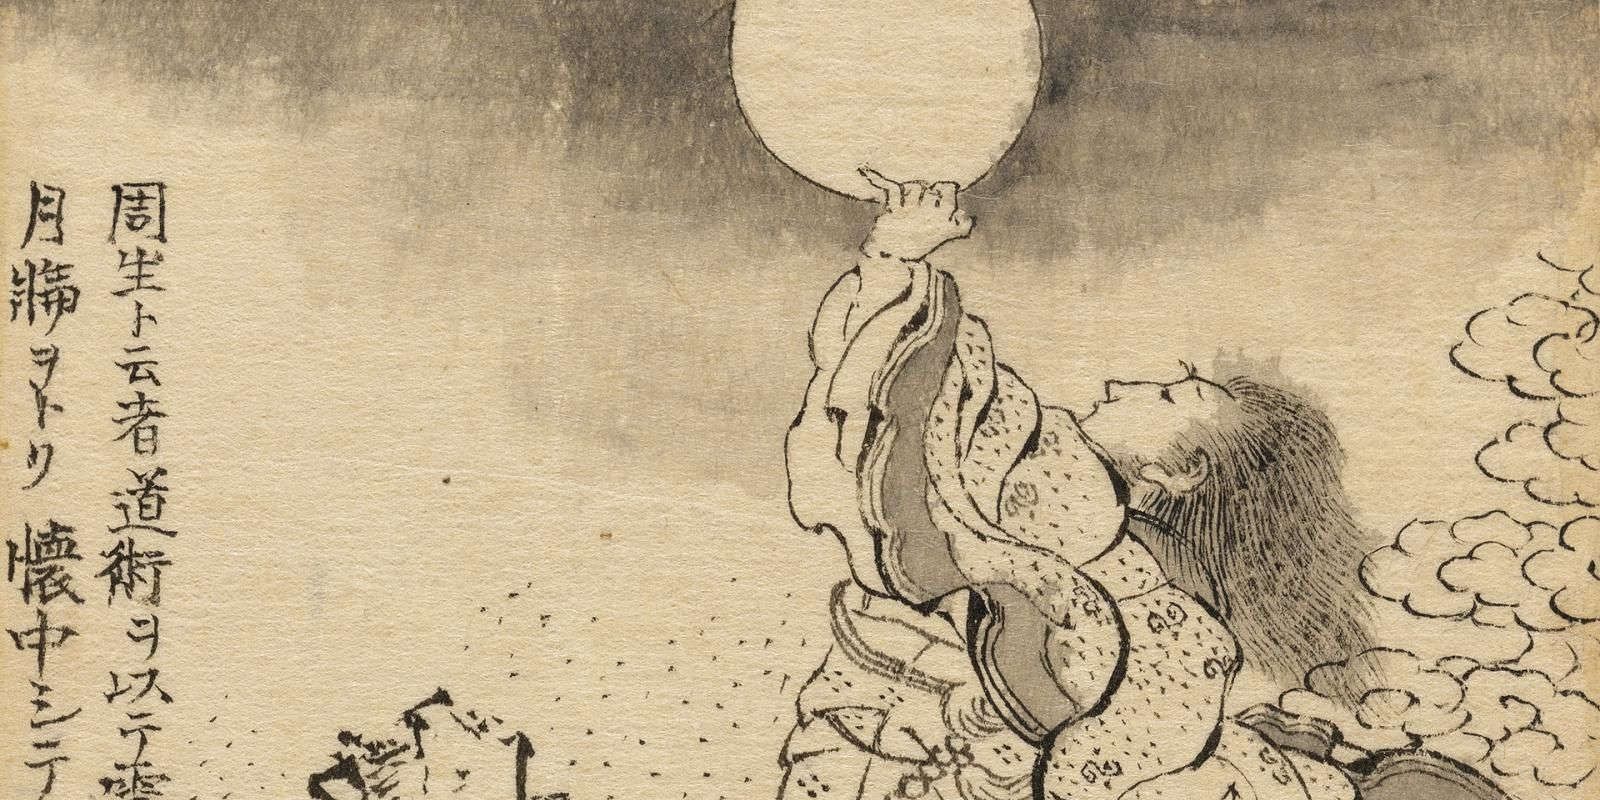 Hokusai. The great picture book of everything